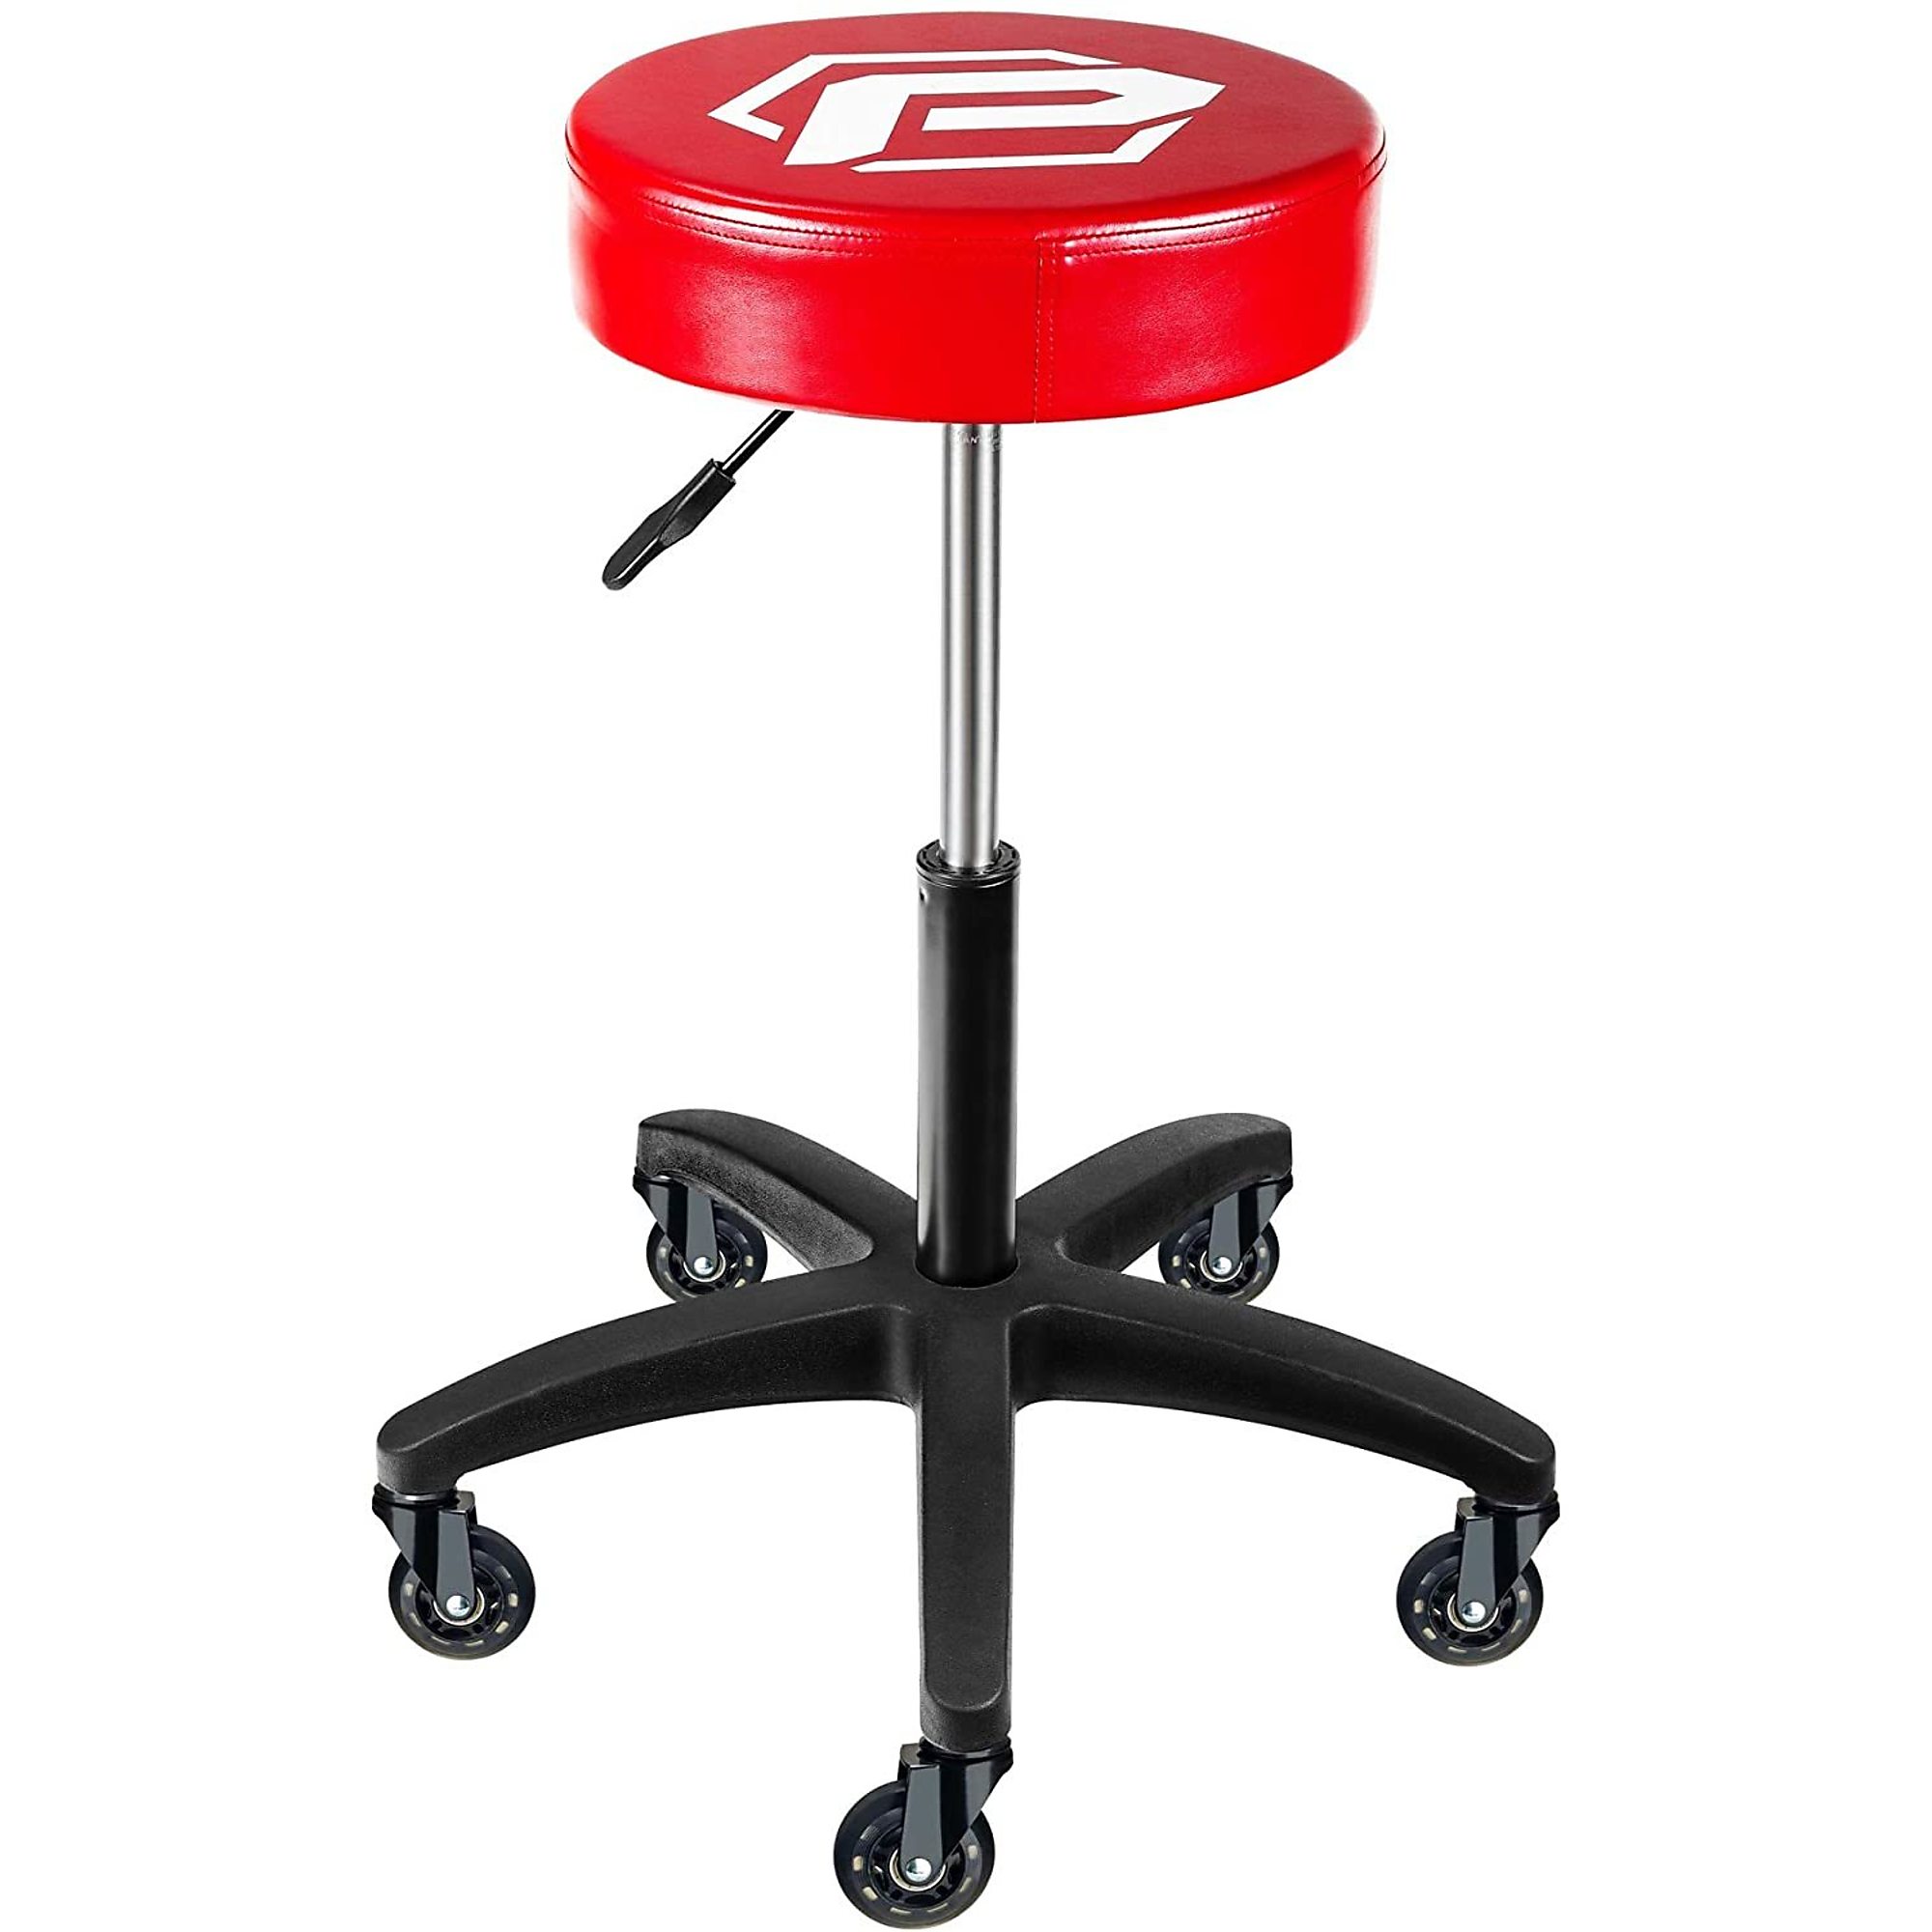 Powerbuilt, Heavy Duty Rolling Mechanic's Seat, Capacity 300 lb, Max. Height 29 in, MInch Height 21 in, Model 240250